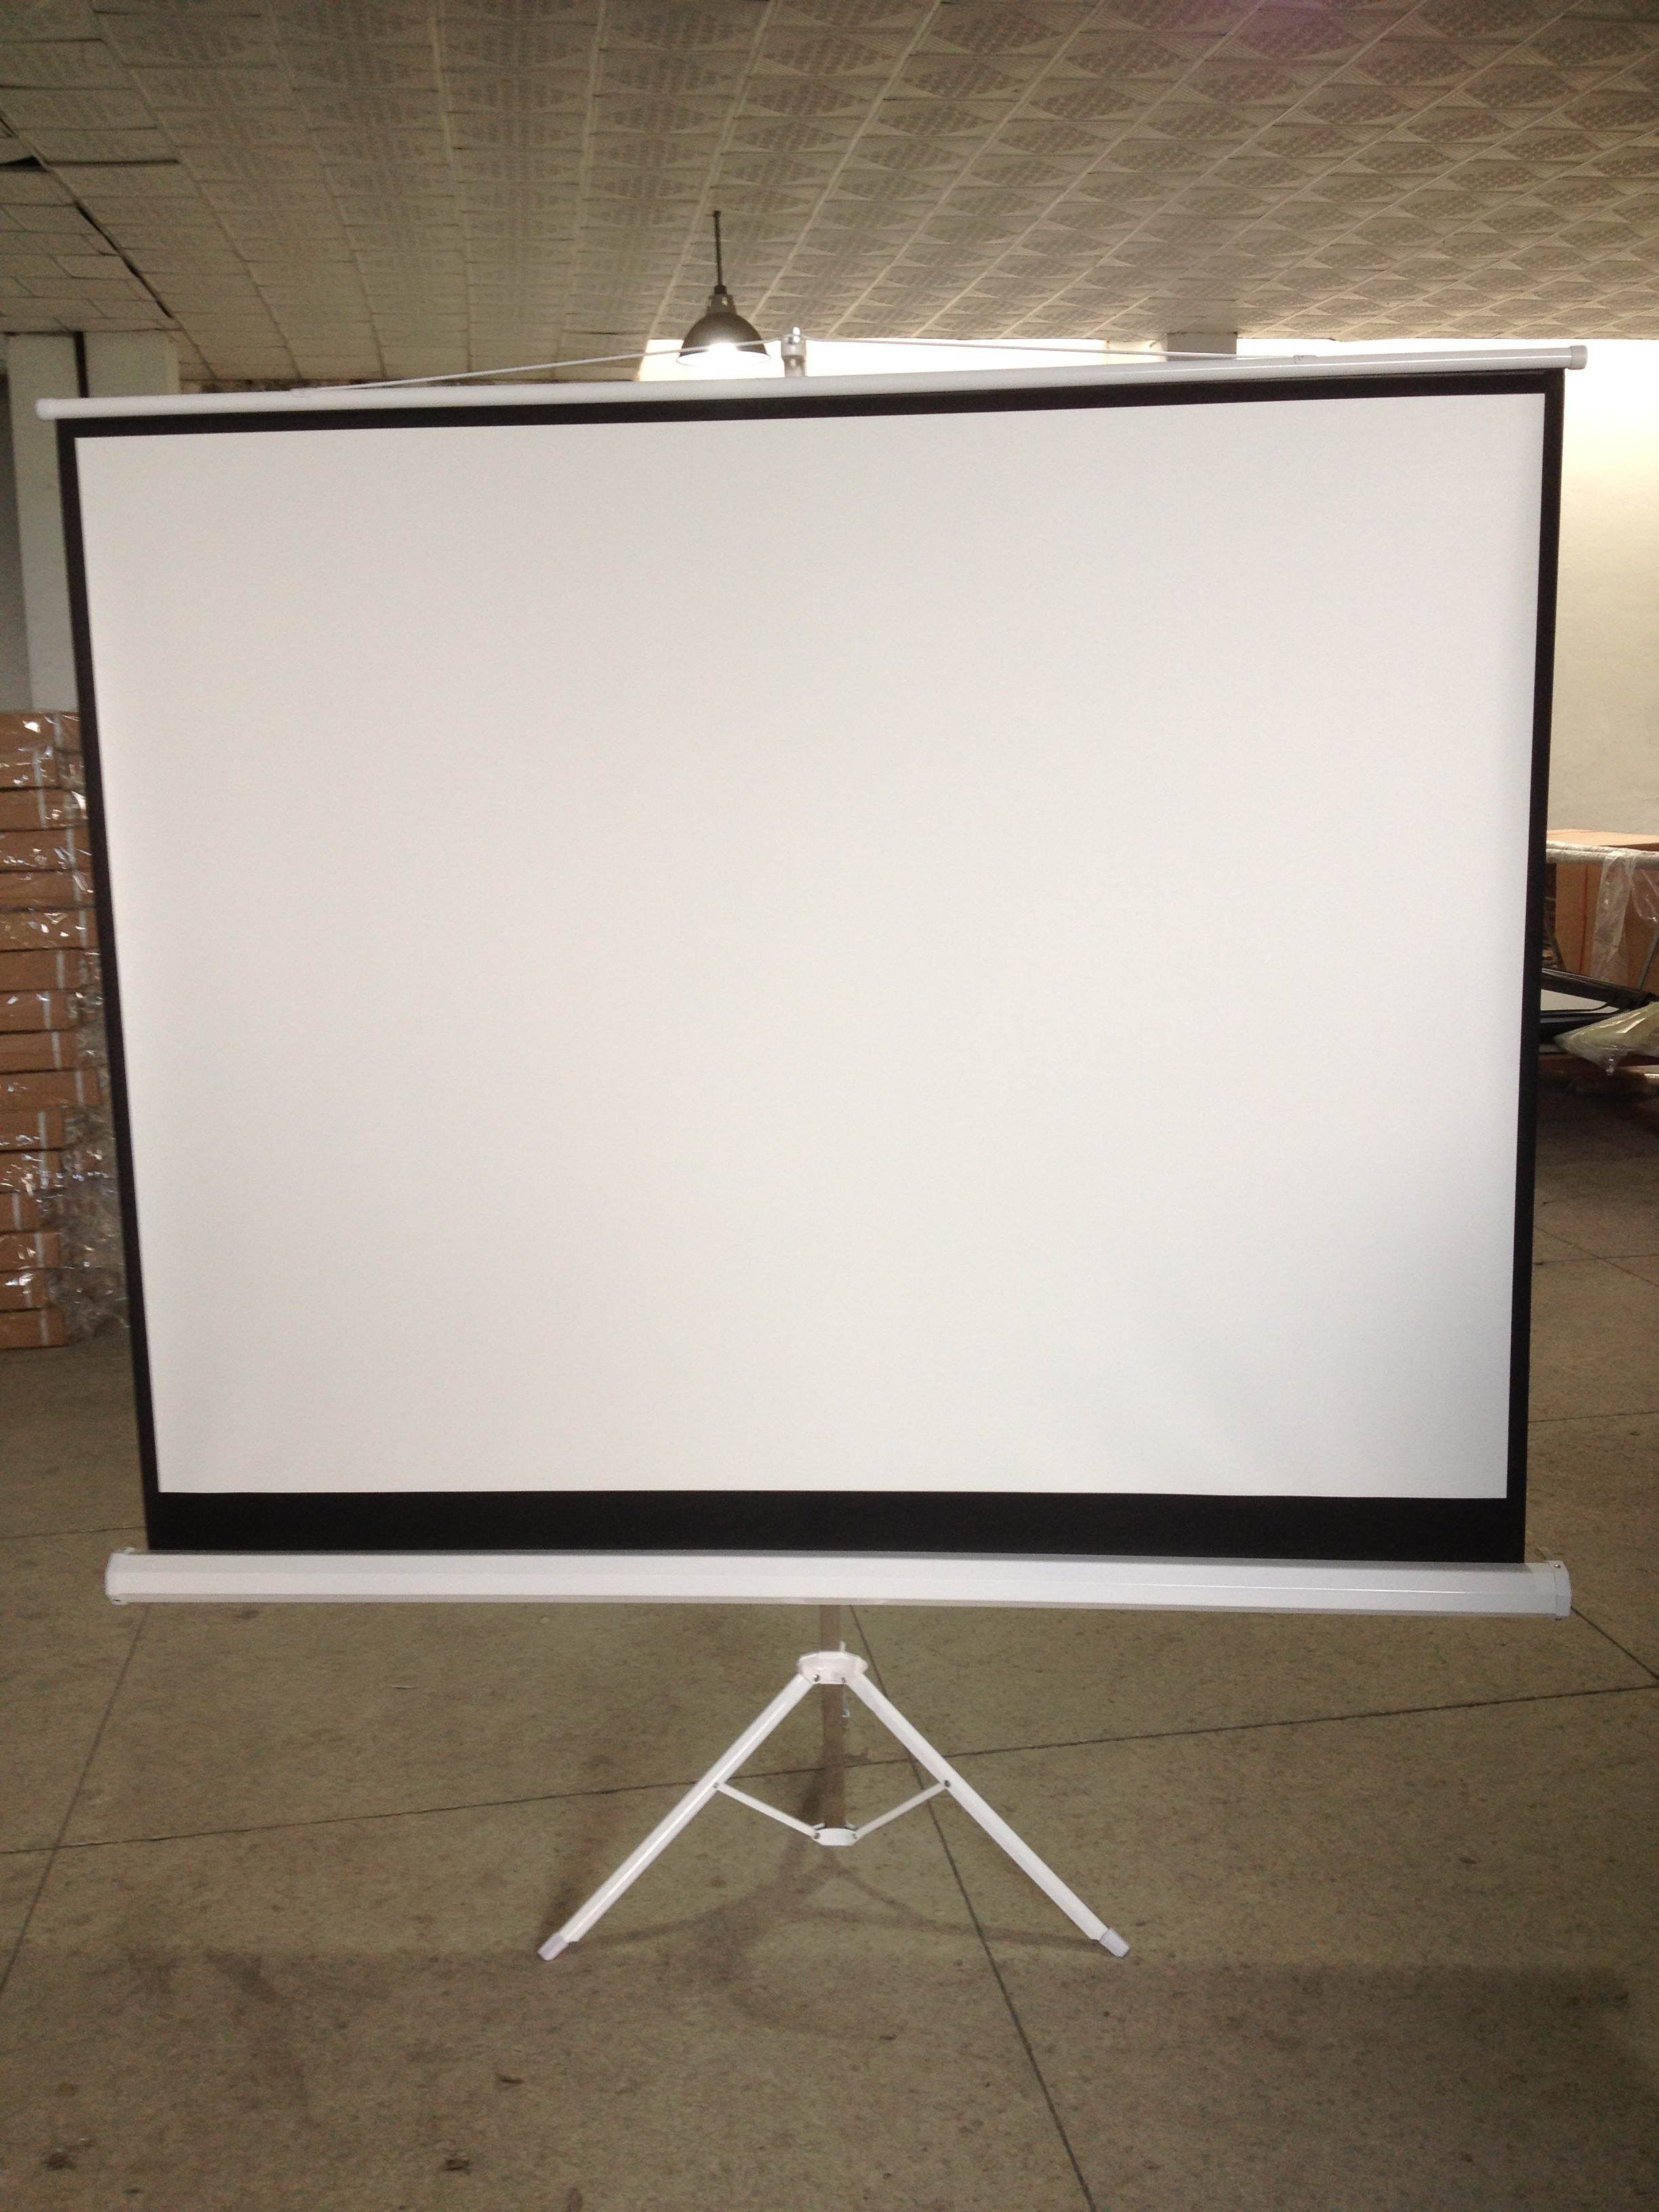 Tripod projection screen cheap high quality projector screen